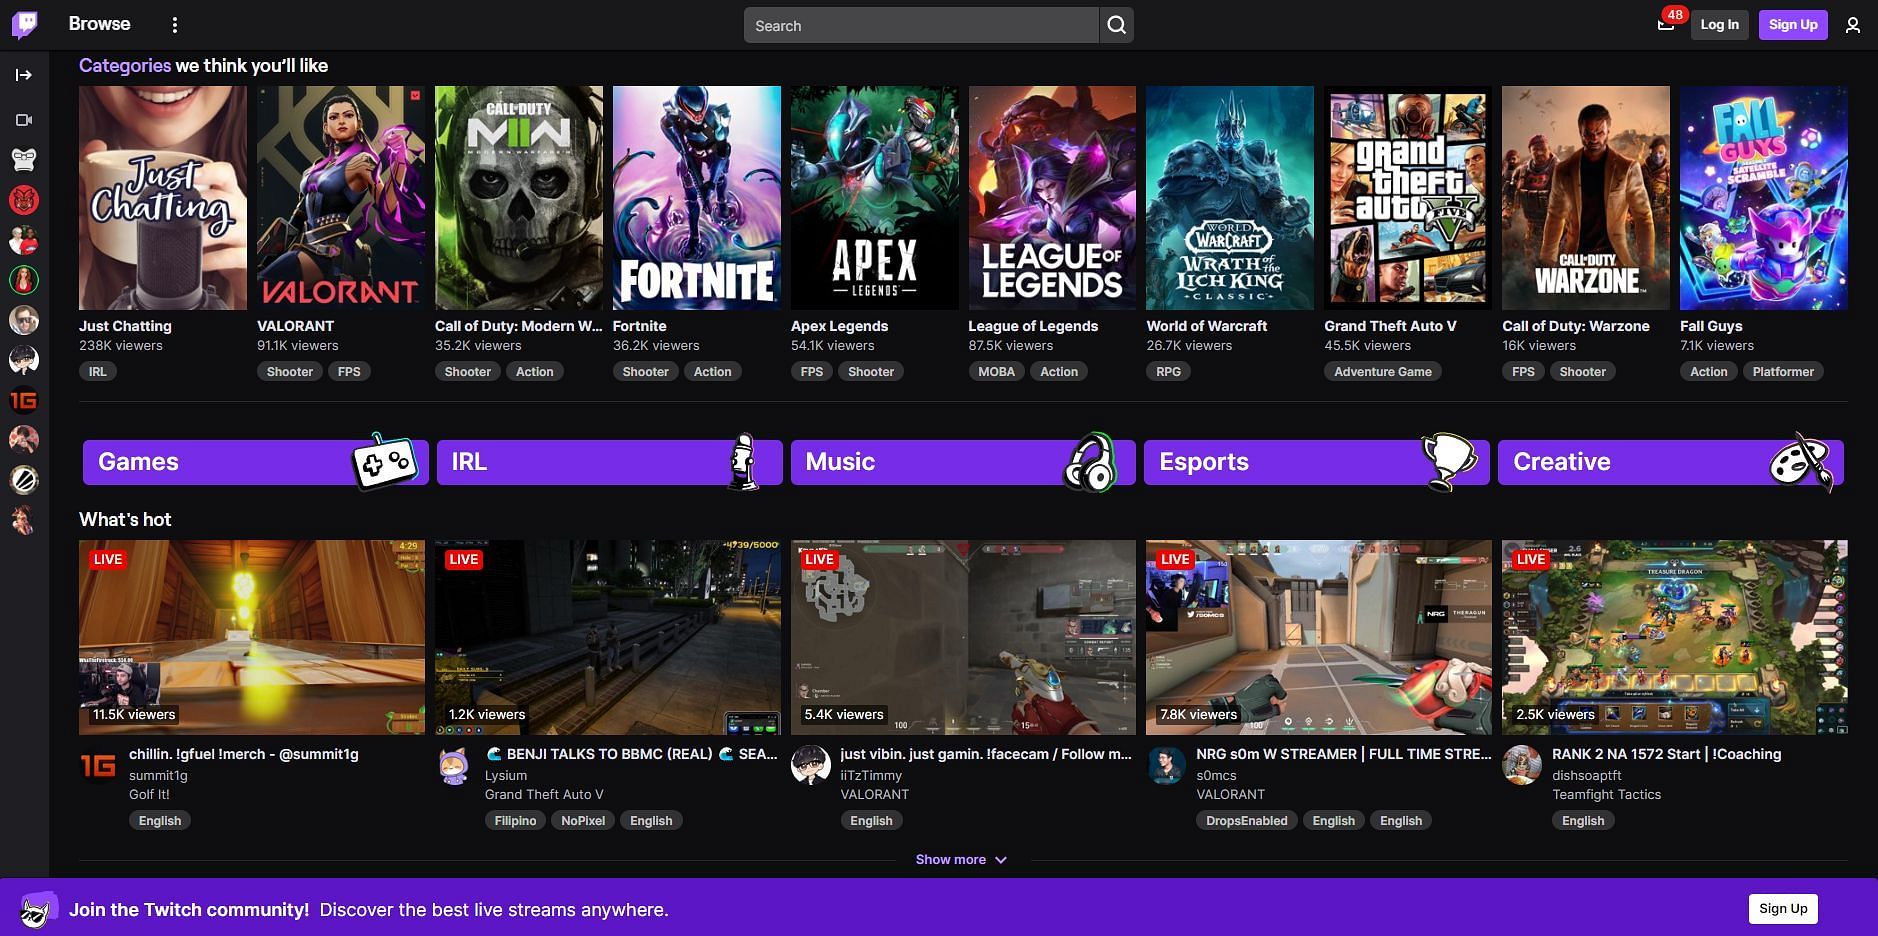 The Twitch home page (Image via Twitch)